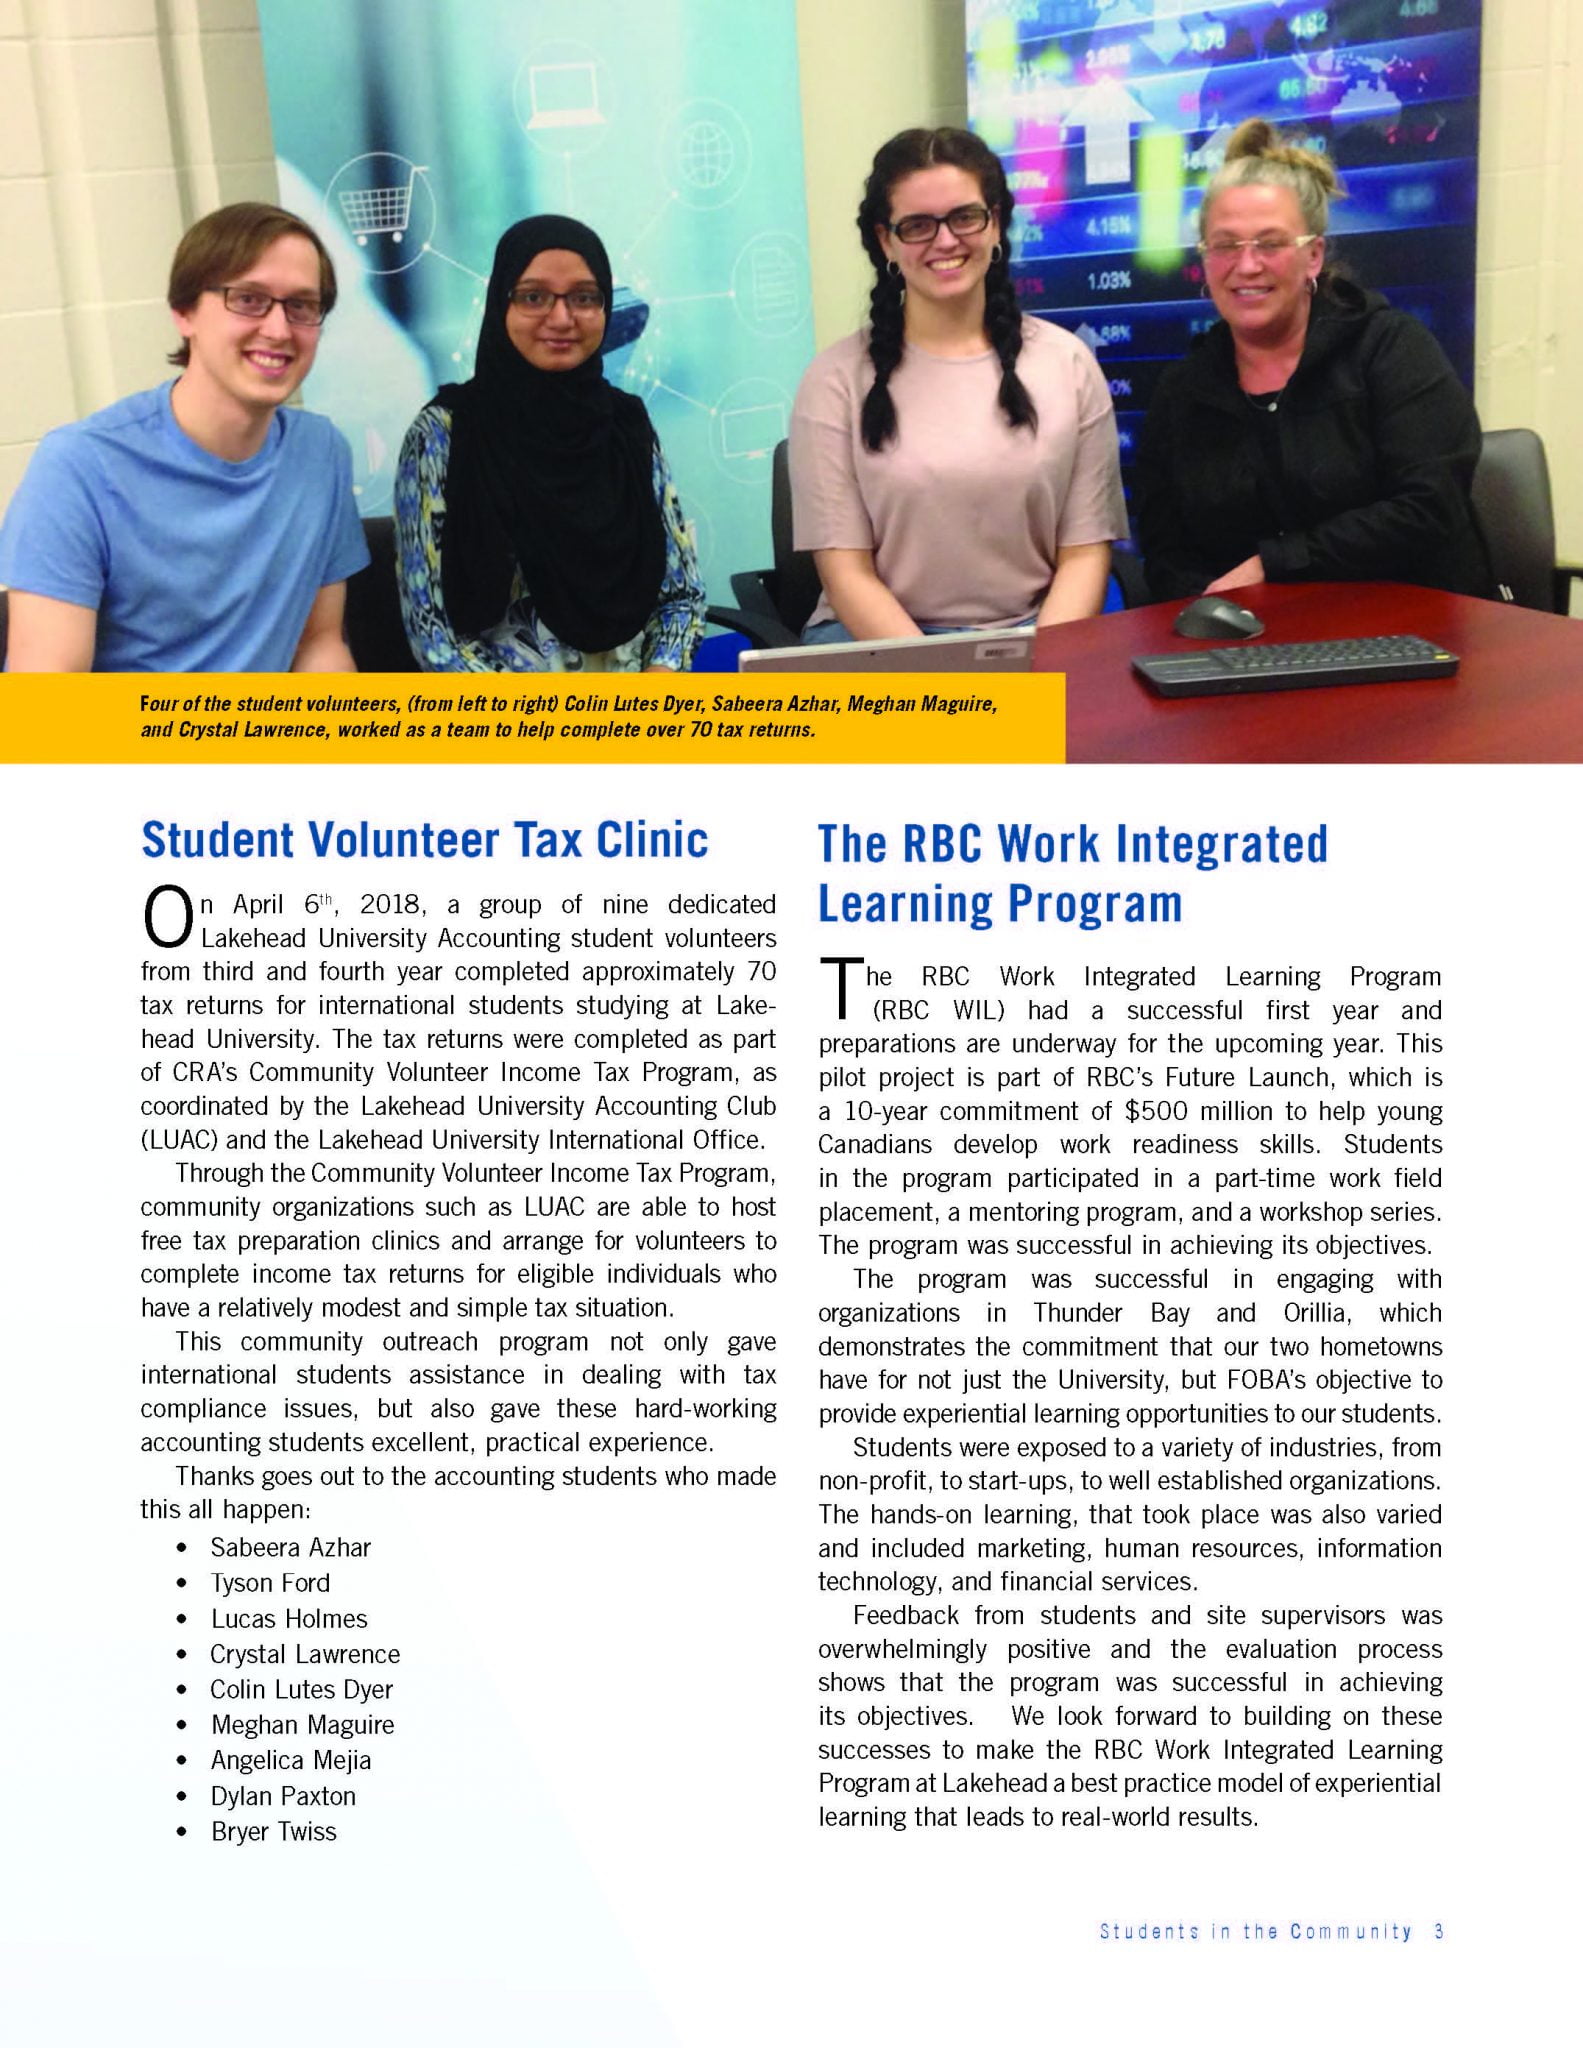 Bus Admin Newsletter Aug16 Page 3 - REVIEW: The RBC Work Integrated Learning Program